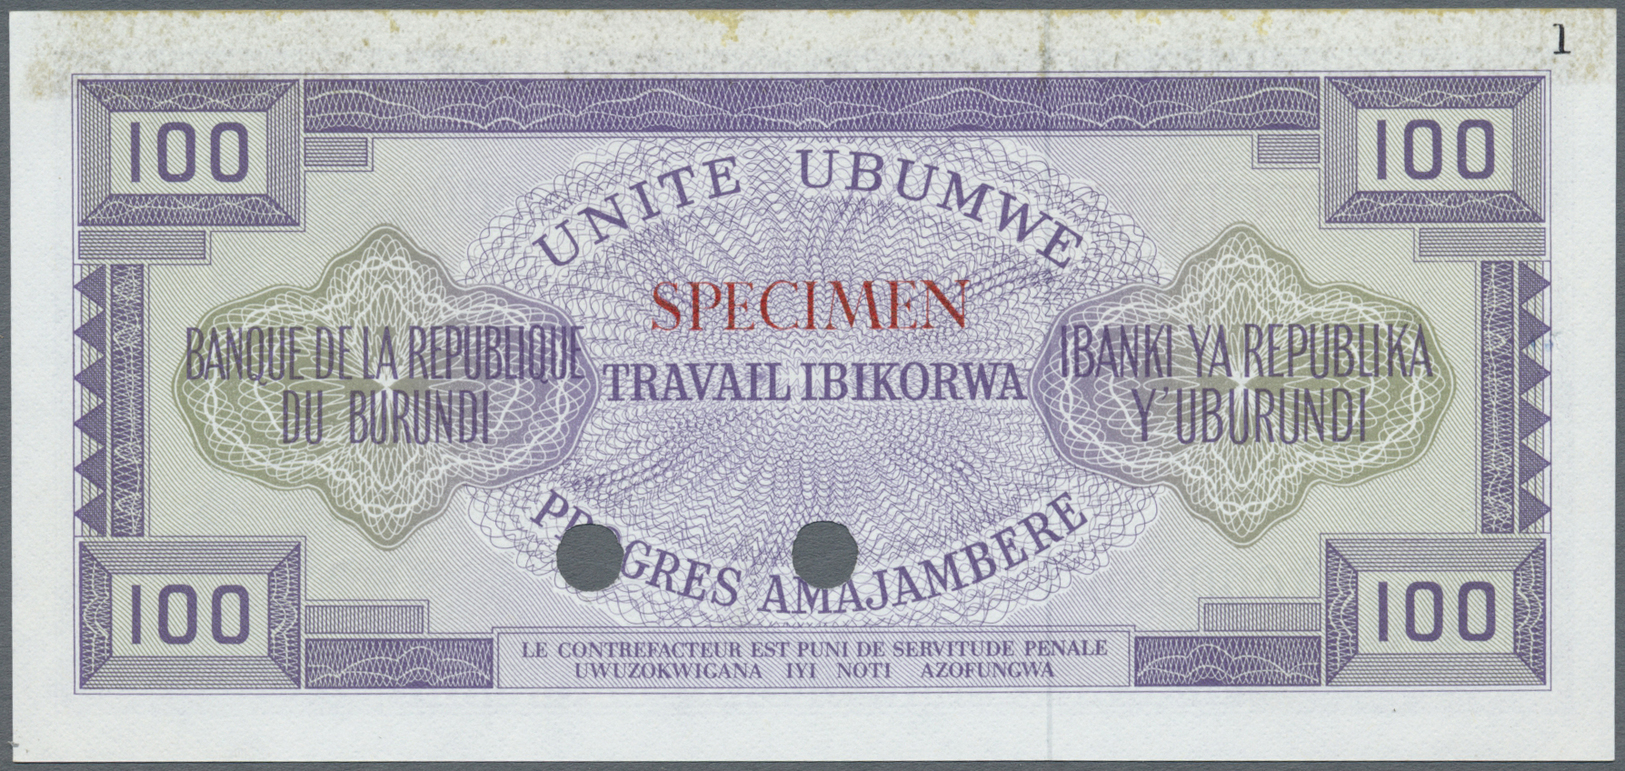 00449 Burundi: 100 Francs 1968 Specimen P. 23a, With Yellow Glue Trace From Former Mounting, Condition: AUNC. - Burundi